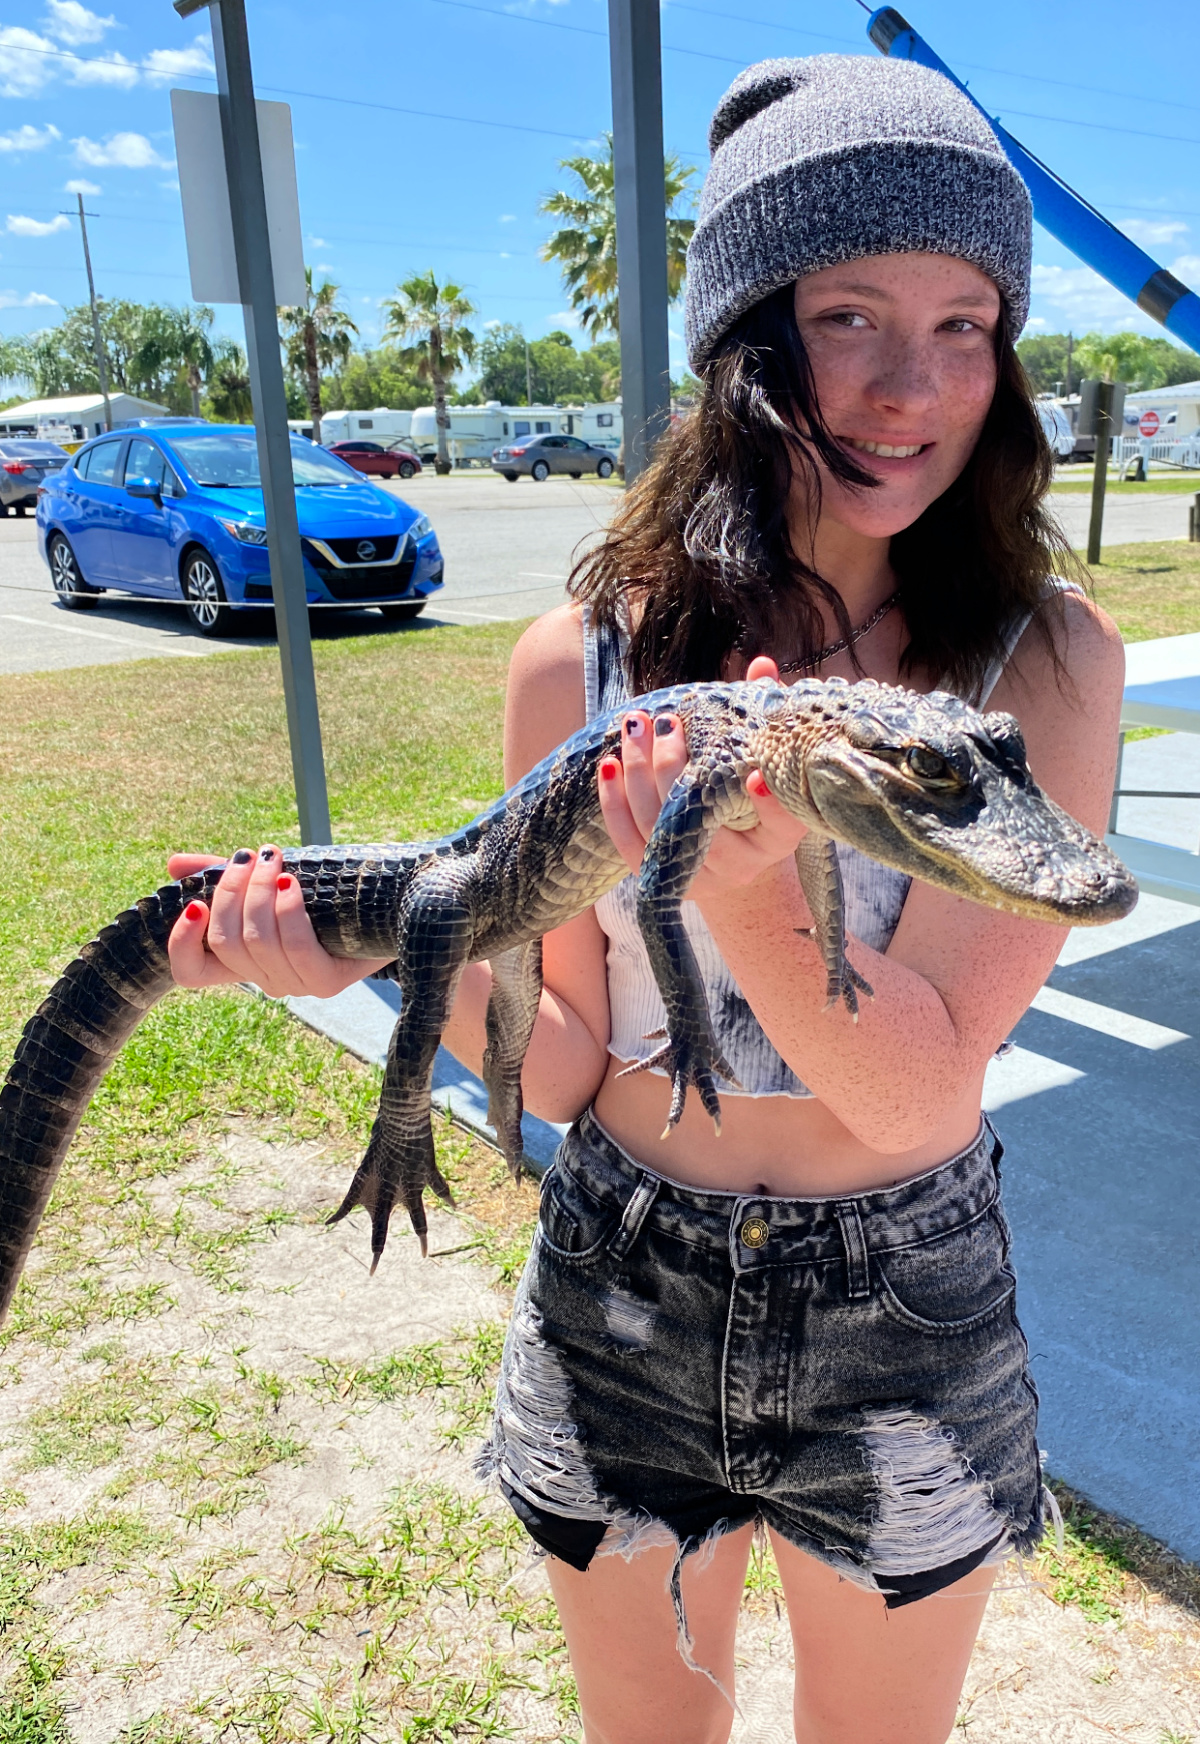 Holding a Baby Alligator